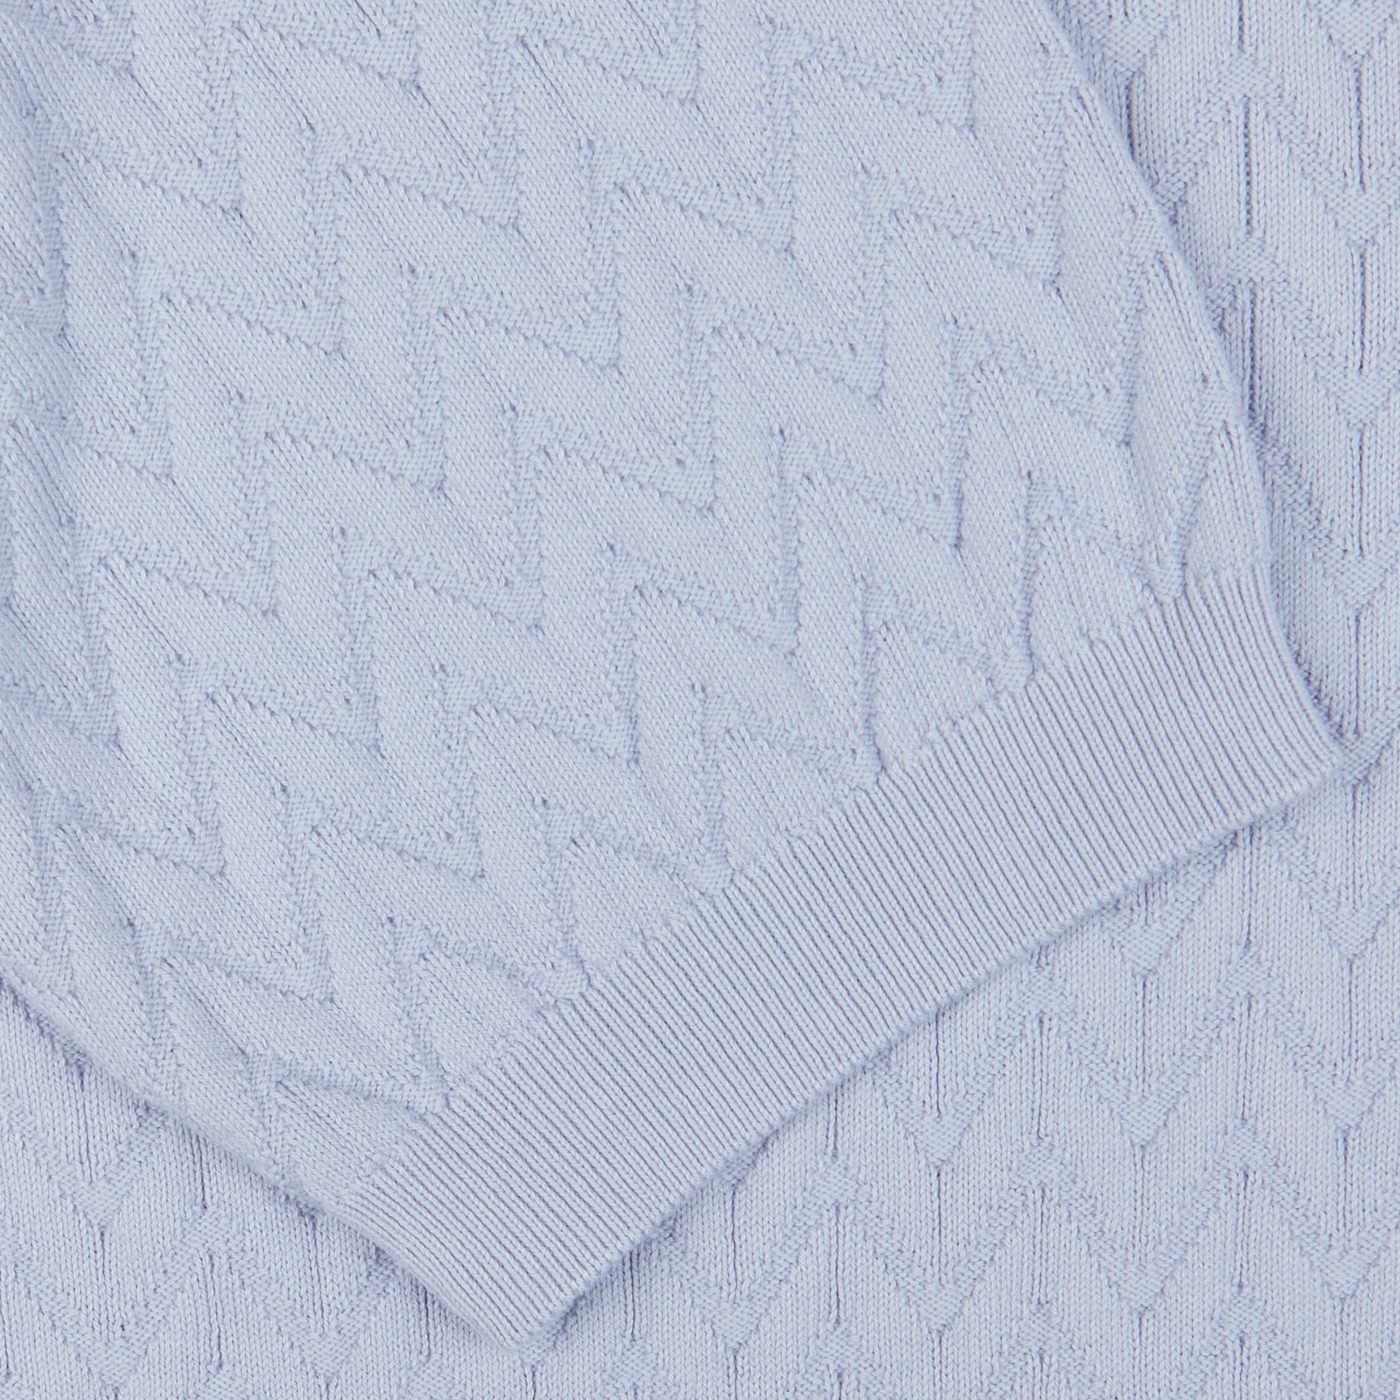 Close-up of a textured Light Blue Cotton Capri Collar Polo Shirt with a knit diamond pattern and ribbed hem, made in Italy by Altea.